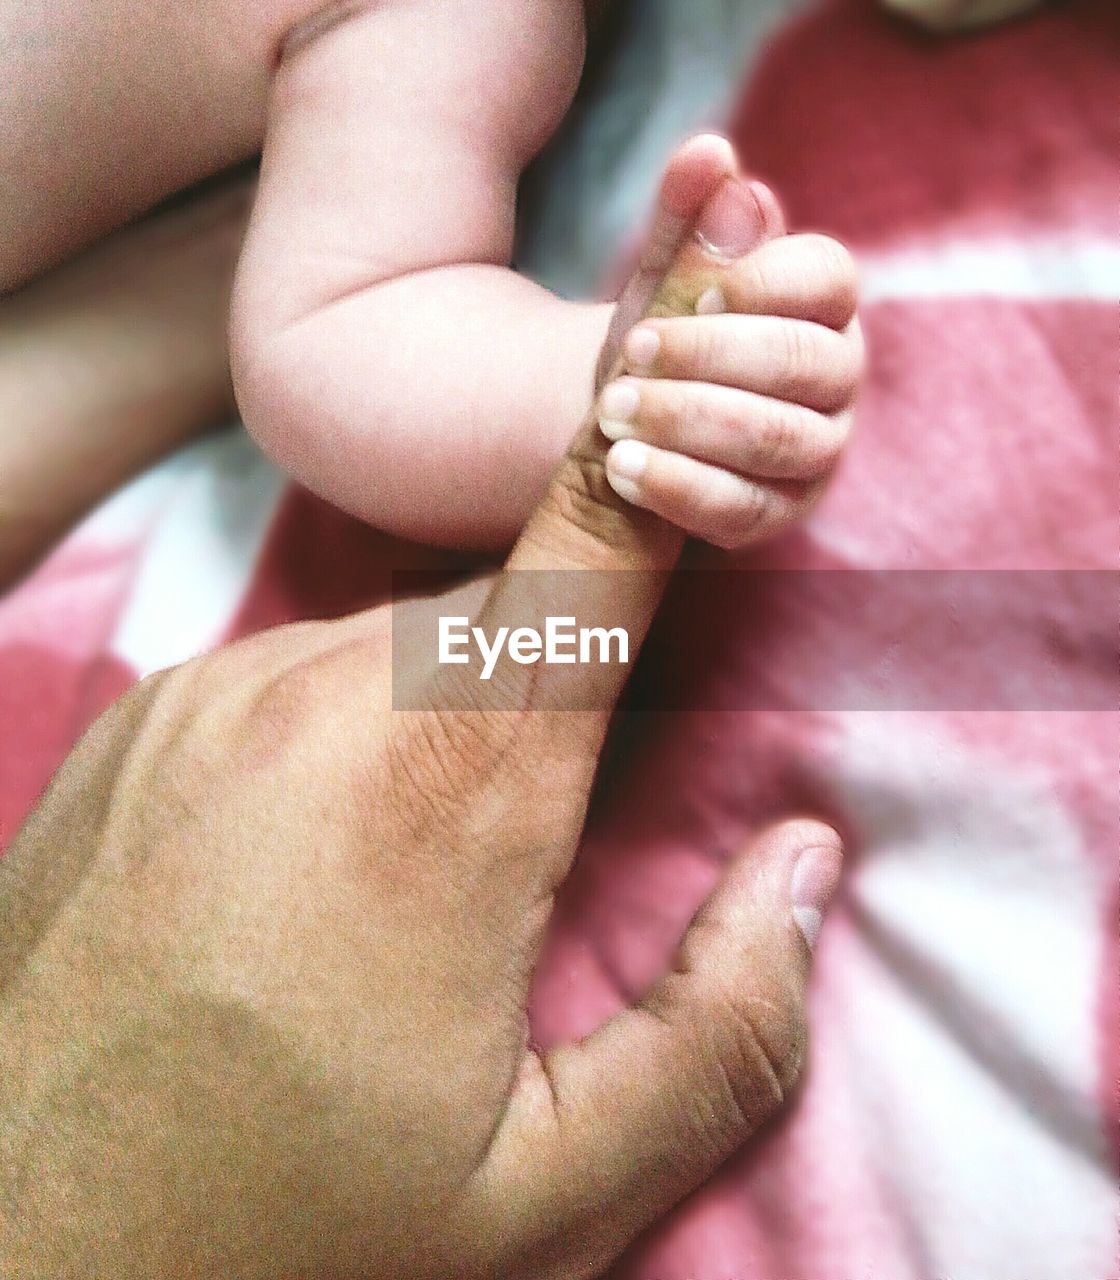 Cropped image of newborn baby holding finger of man on bed